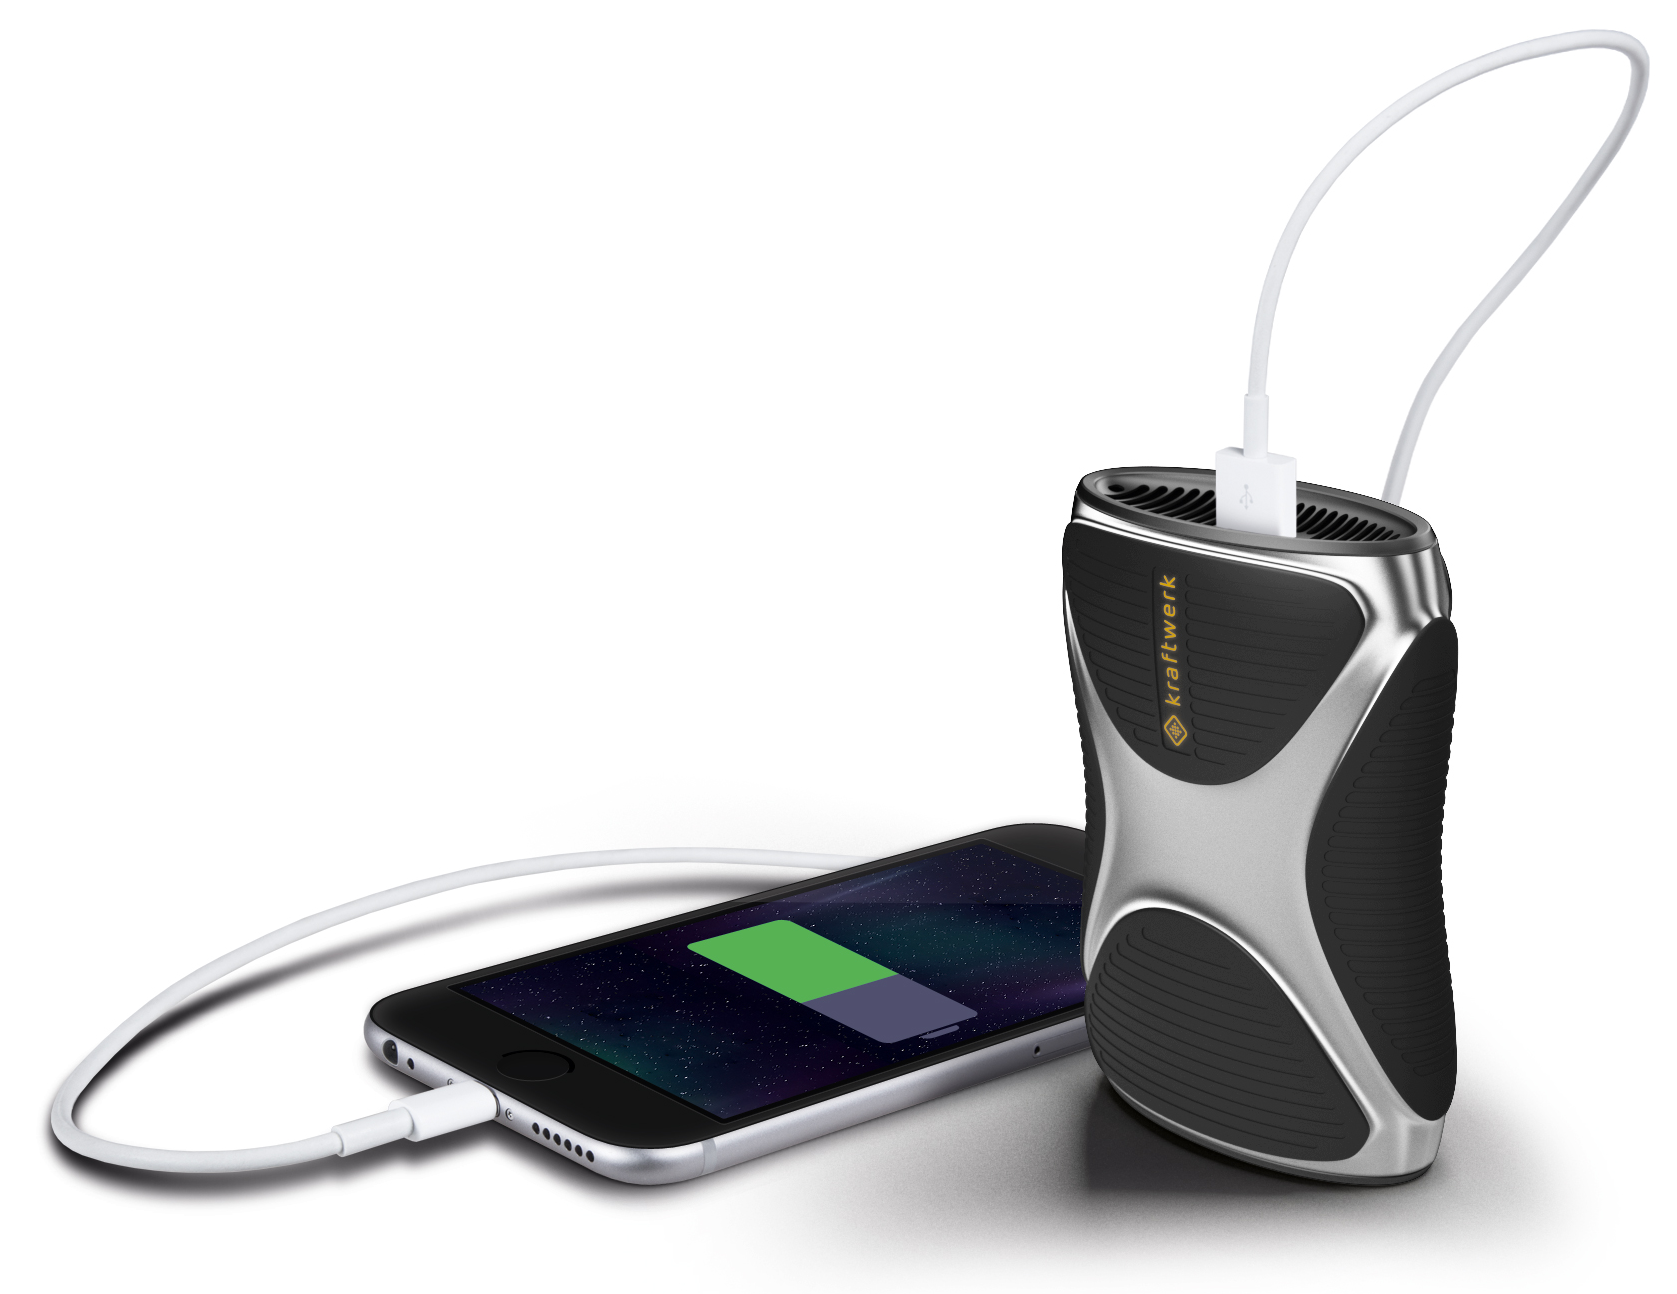 Kraftwerk Fuel Cell Lets You Charge Your Phone With Butane